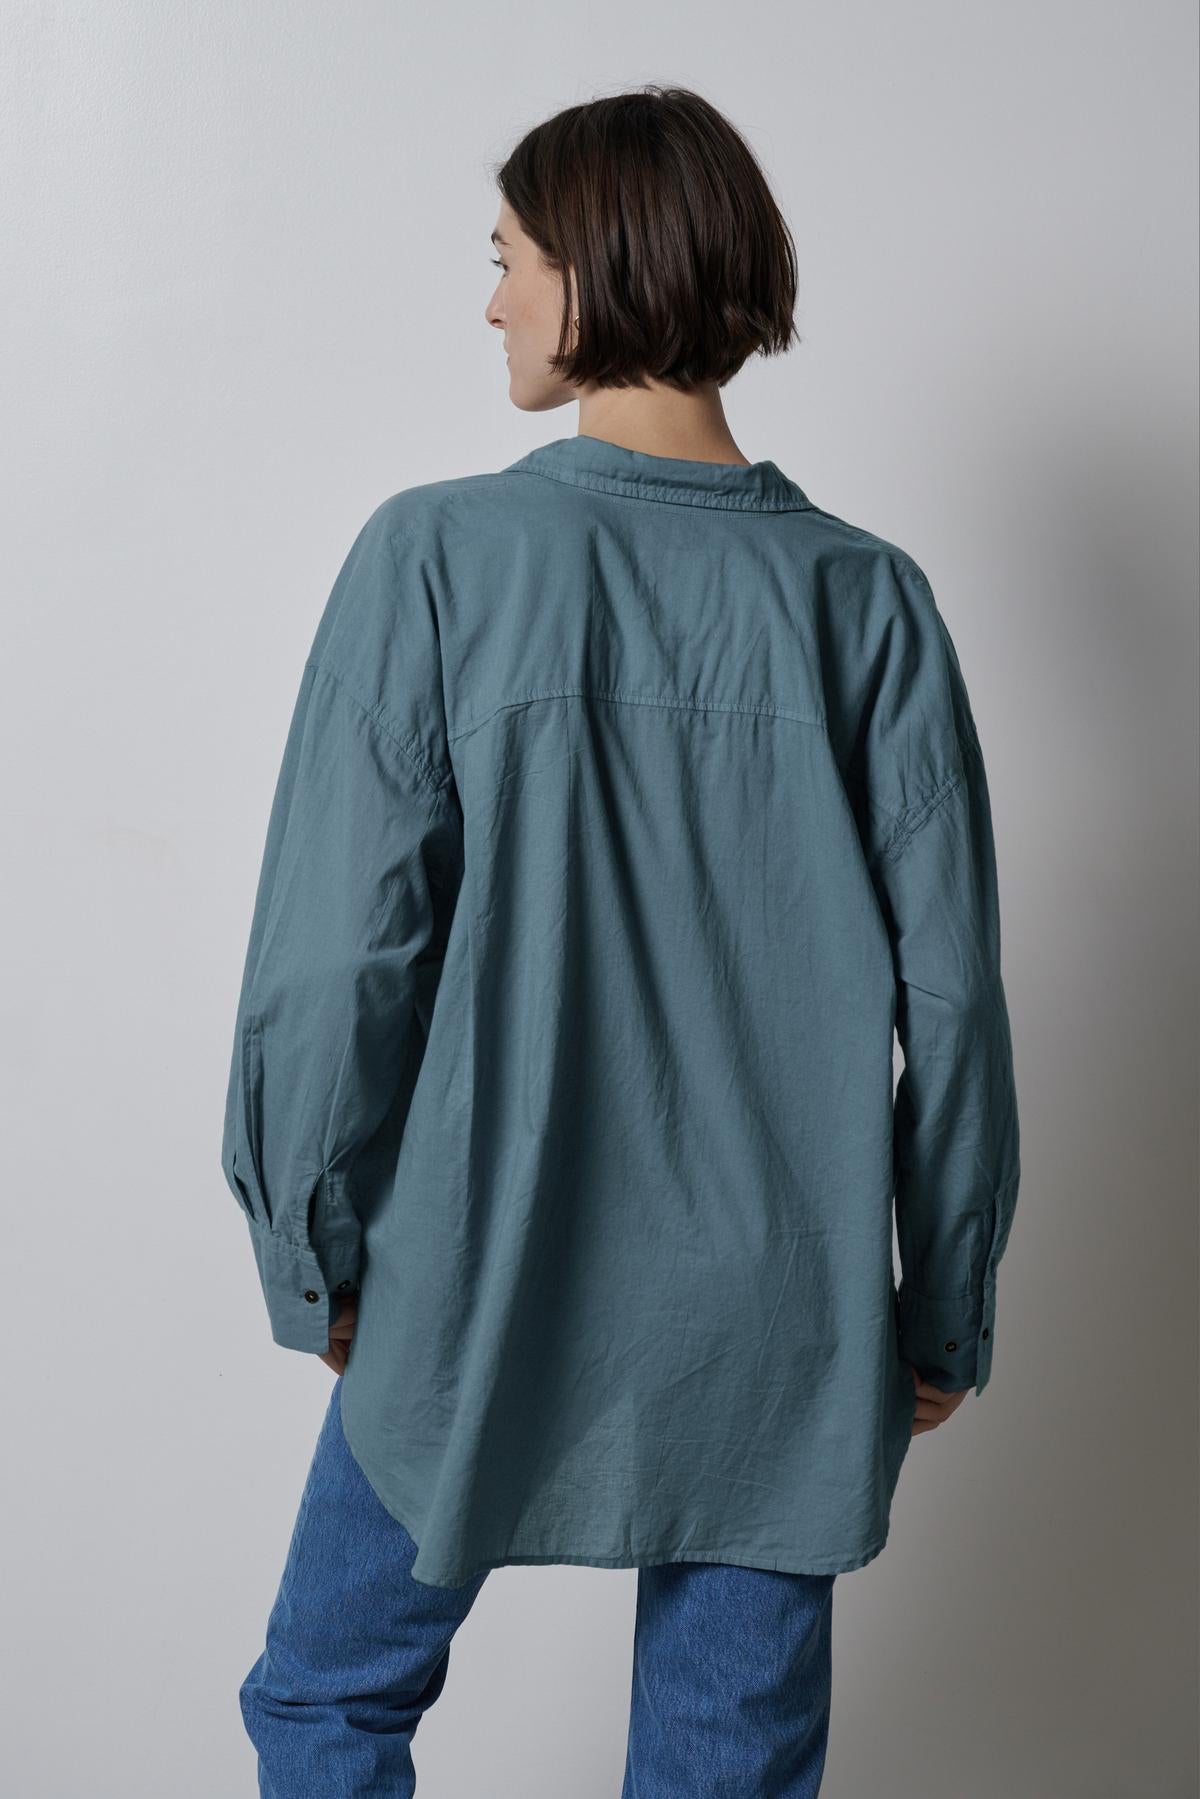 An oversized borrowed-from-the-boys Redondo Button-Up Shirt silhouette by Velvet by Jenny Graham.-35783065960641